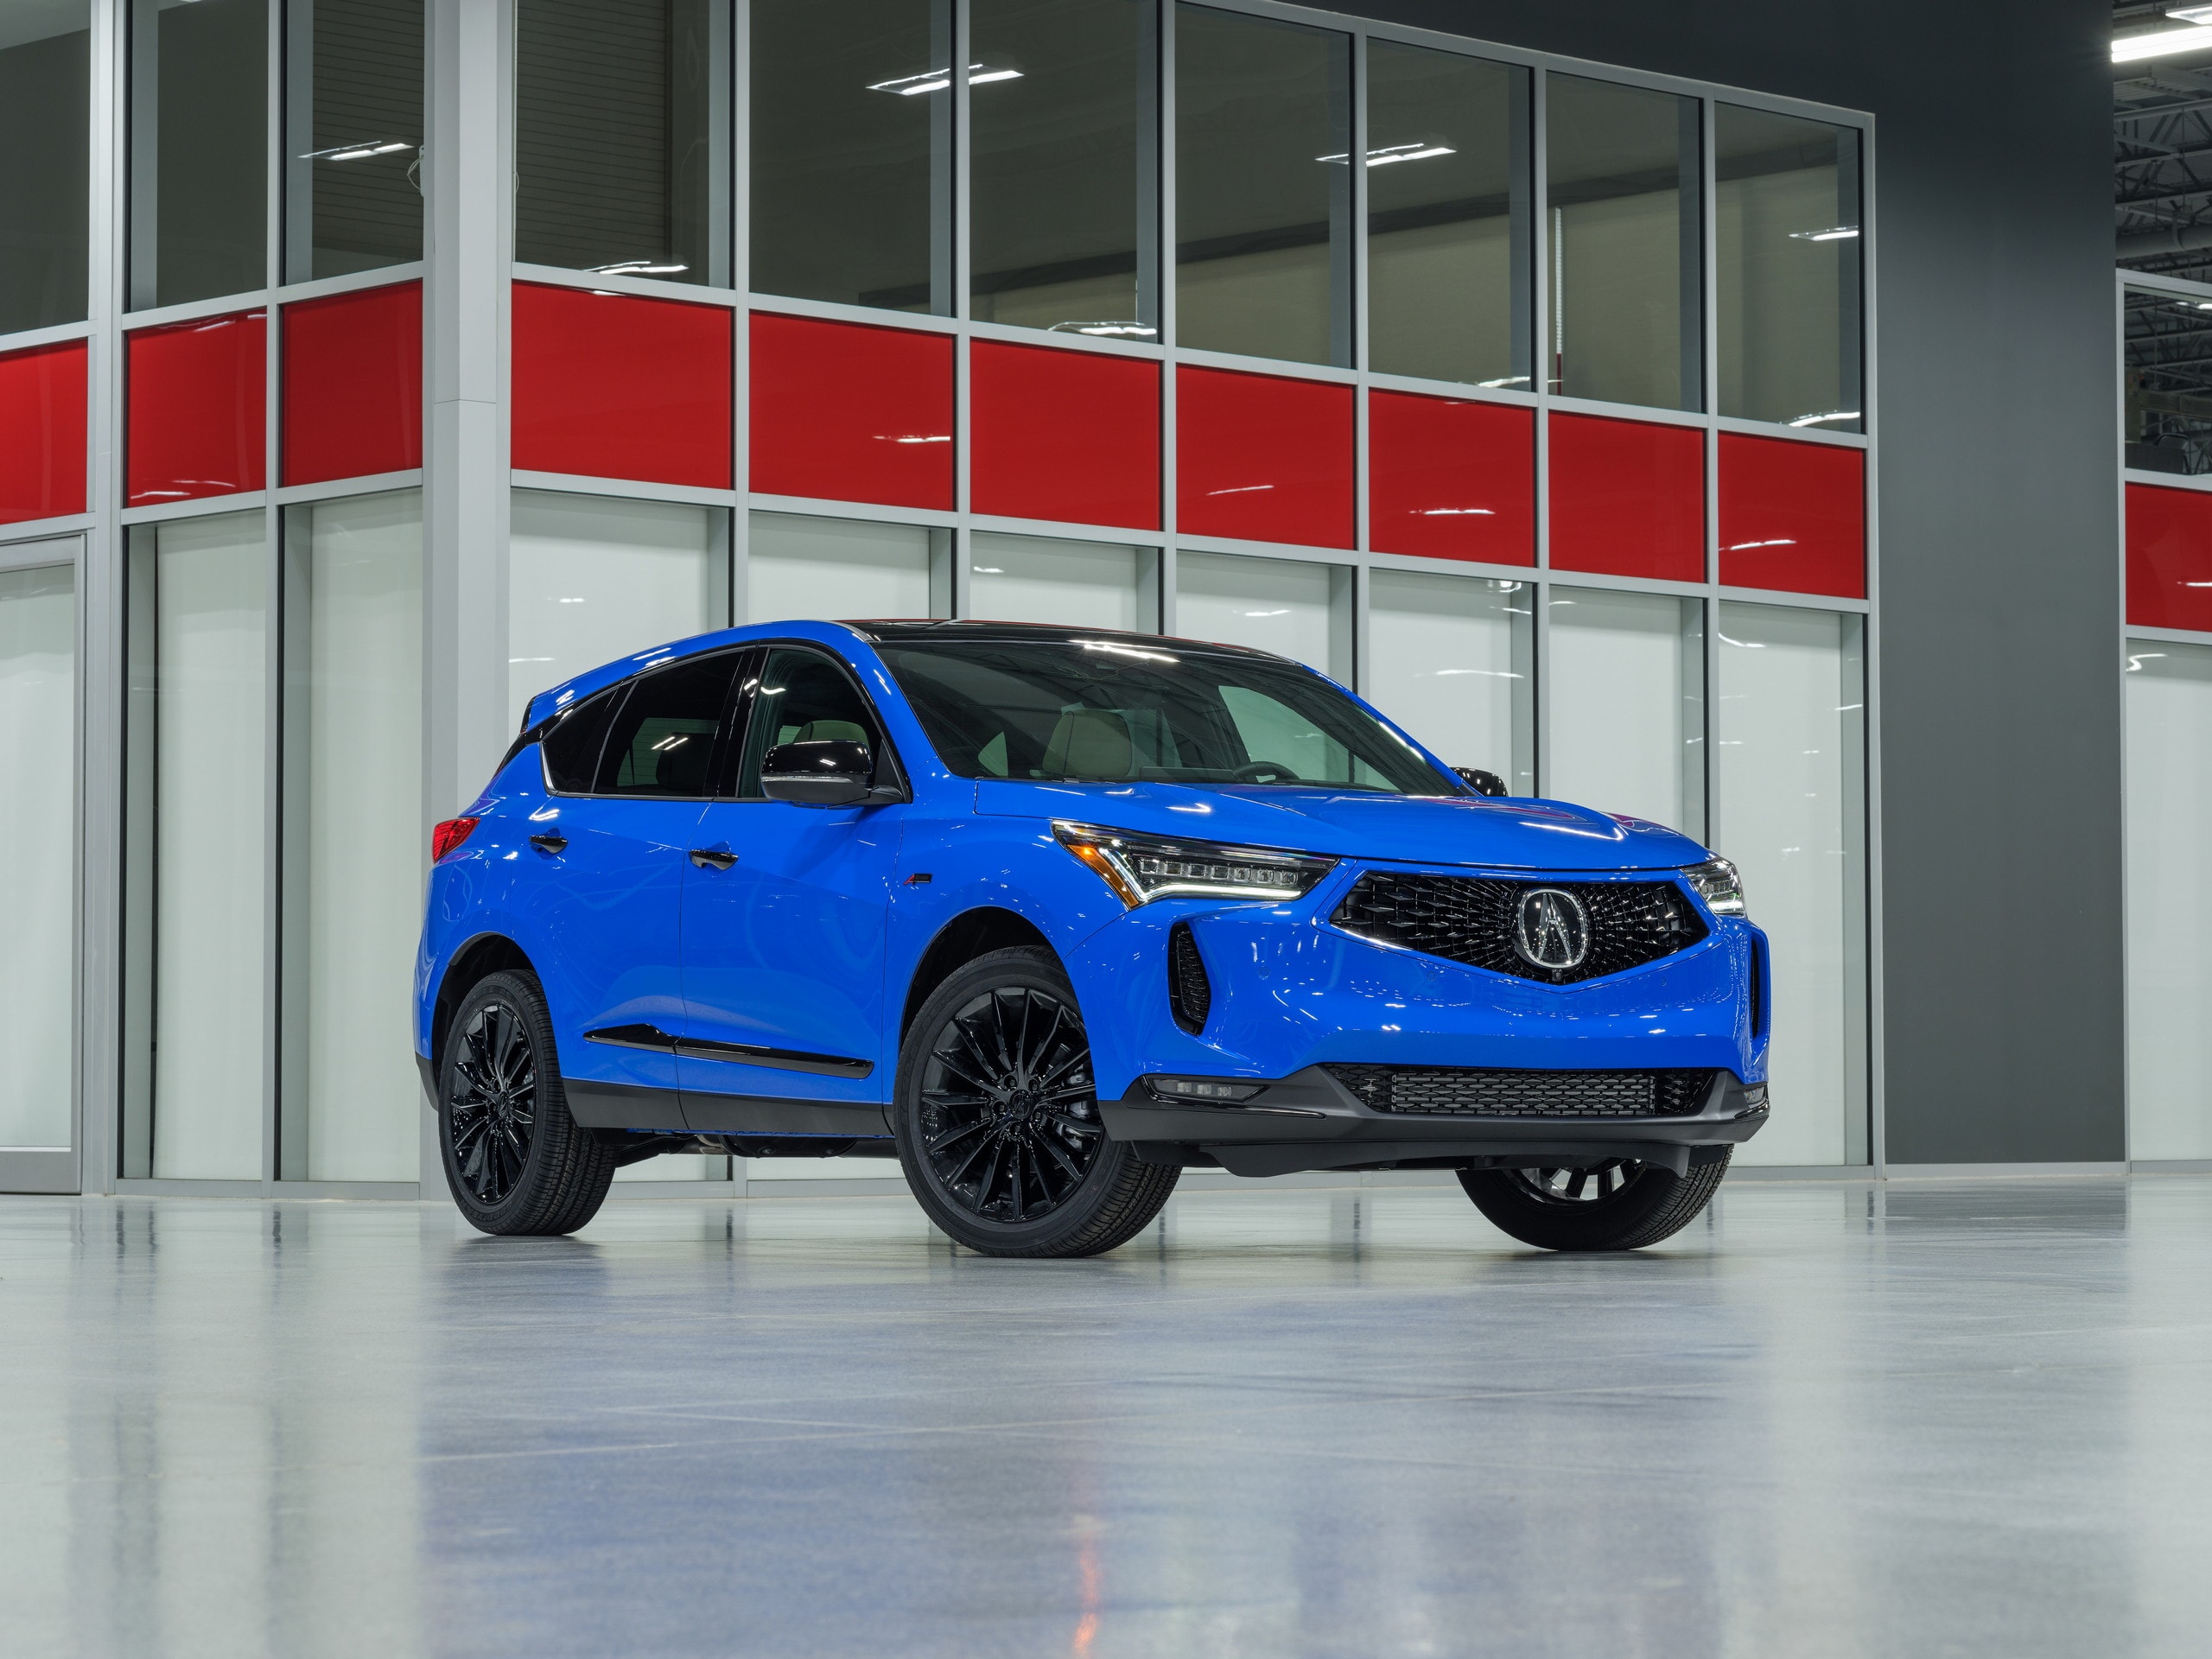 2022 Acura RDX Goes Under the Knife, Gets New Face and More Tech